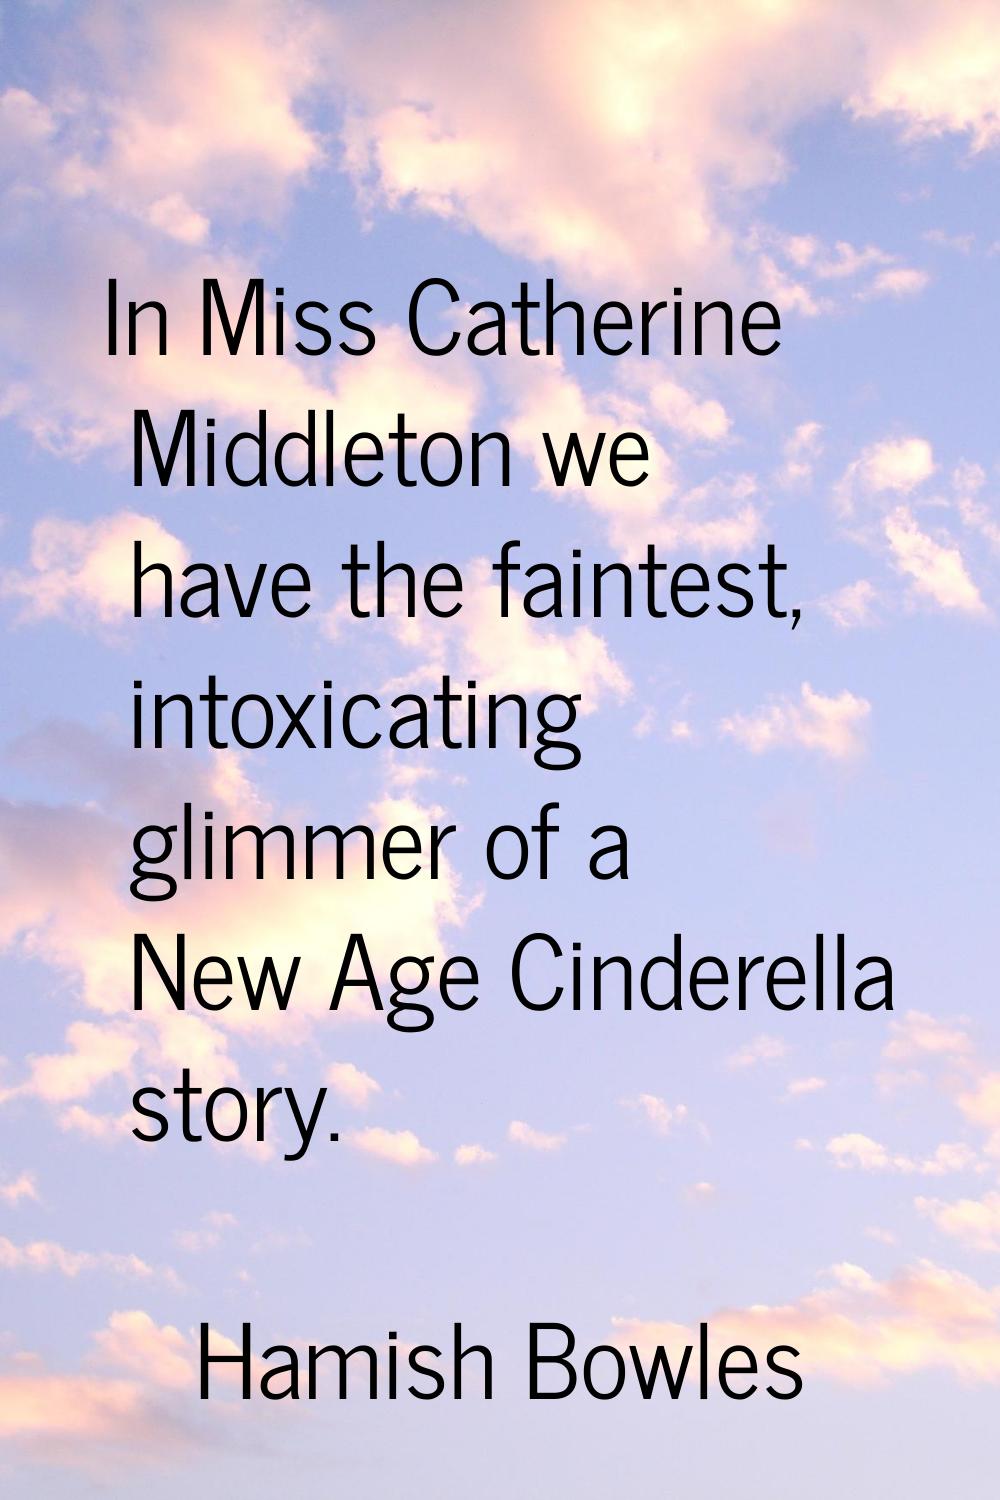 In Miss Catherine Middleton we have the faintest, intoxicating glimmer of a New Age Cinderella stor